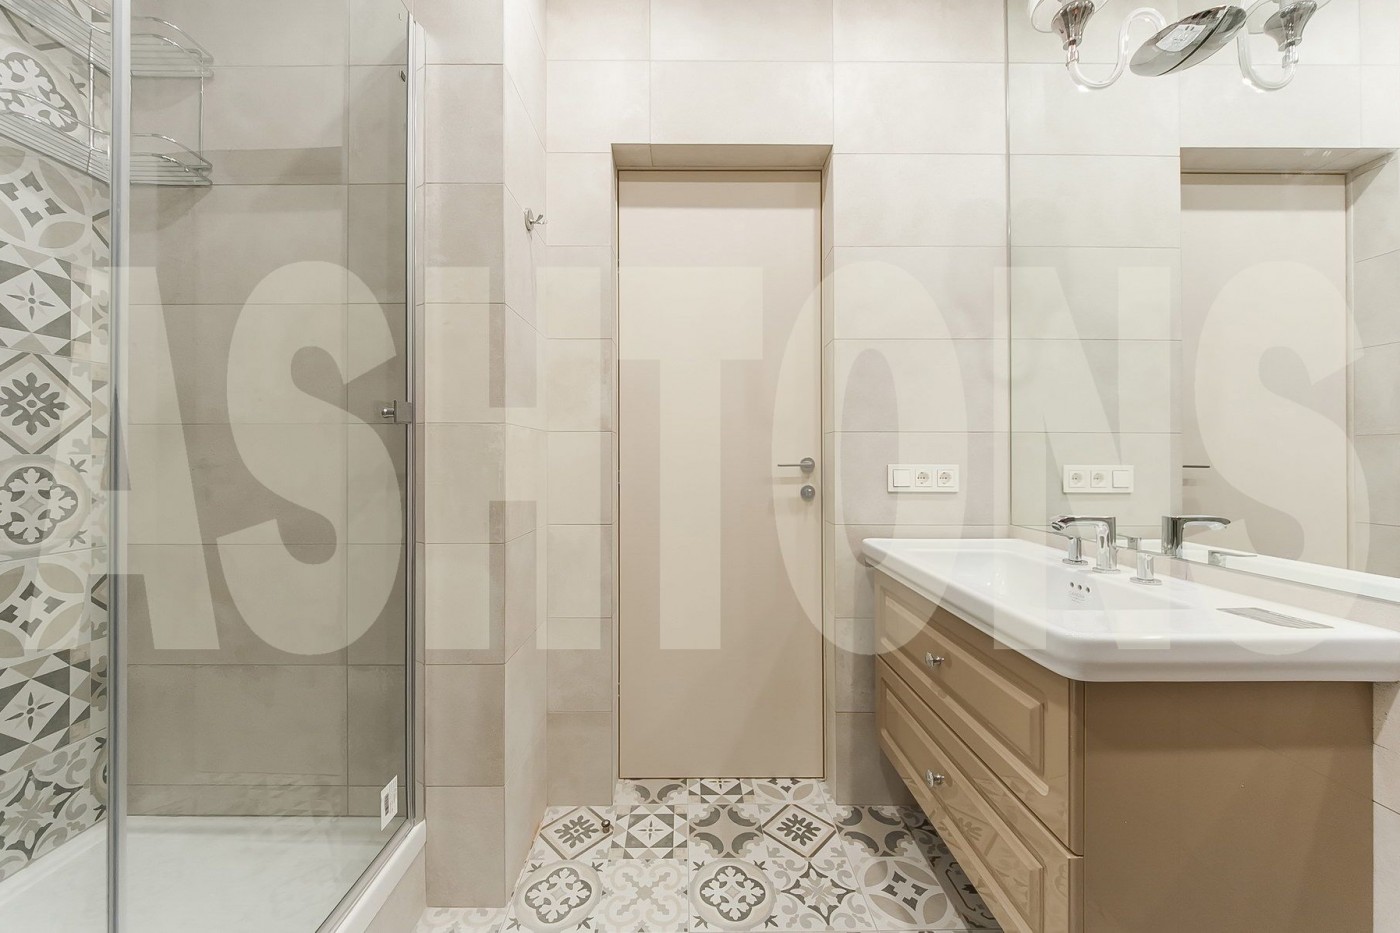 Apartment for rent in elite Residential Complex "Sytinsky" on Bogoslovsky Lane, building 12A at the Patriarch's Ponds by real estate agency ASHTONS INTERNATIONAL REALTY